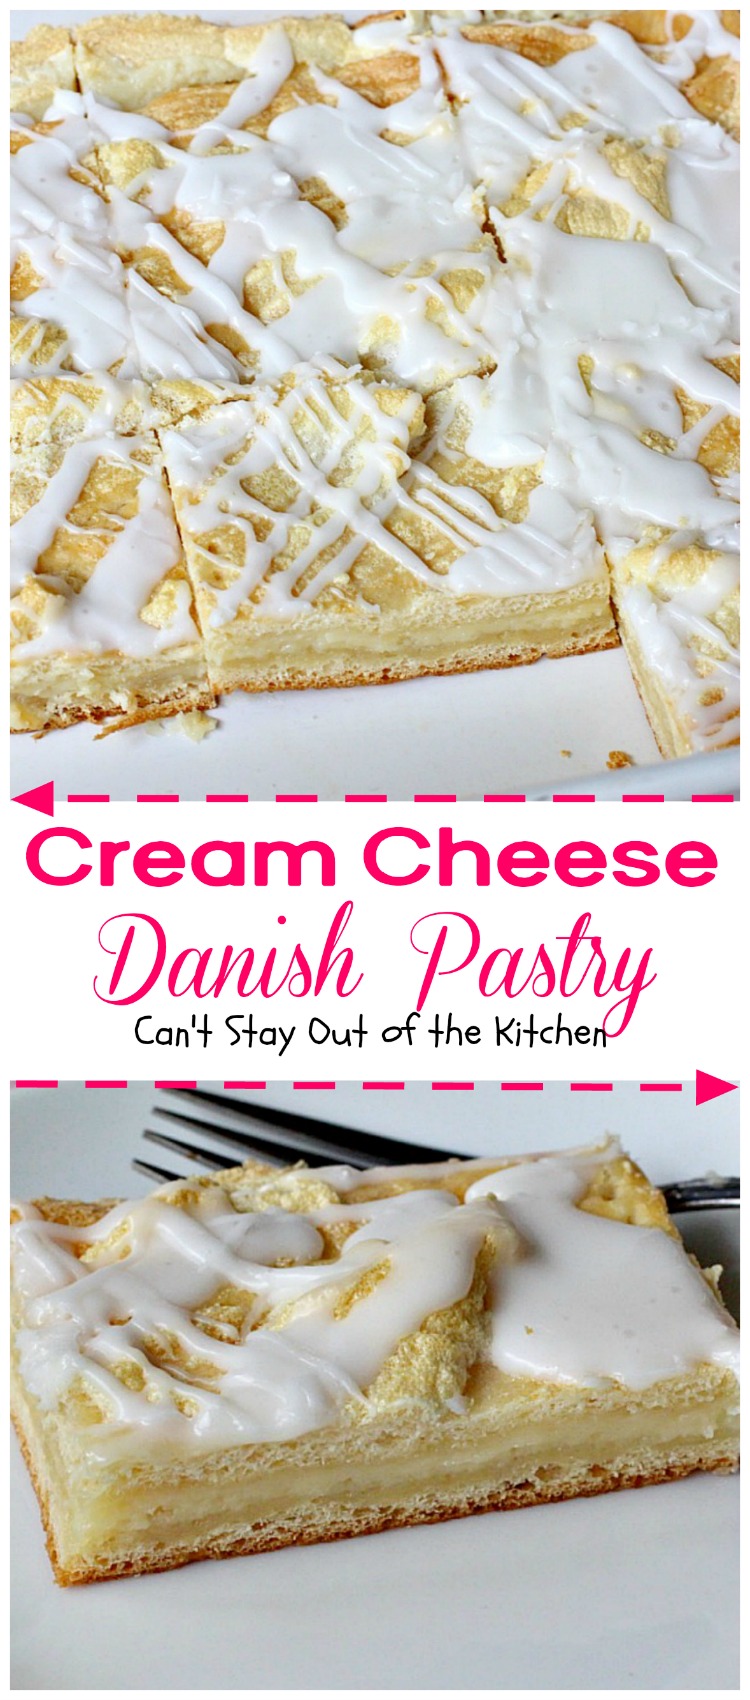 Cream Cheese Danish Pastry | Can't Stay Out of the Kitchen